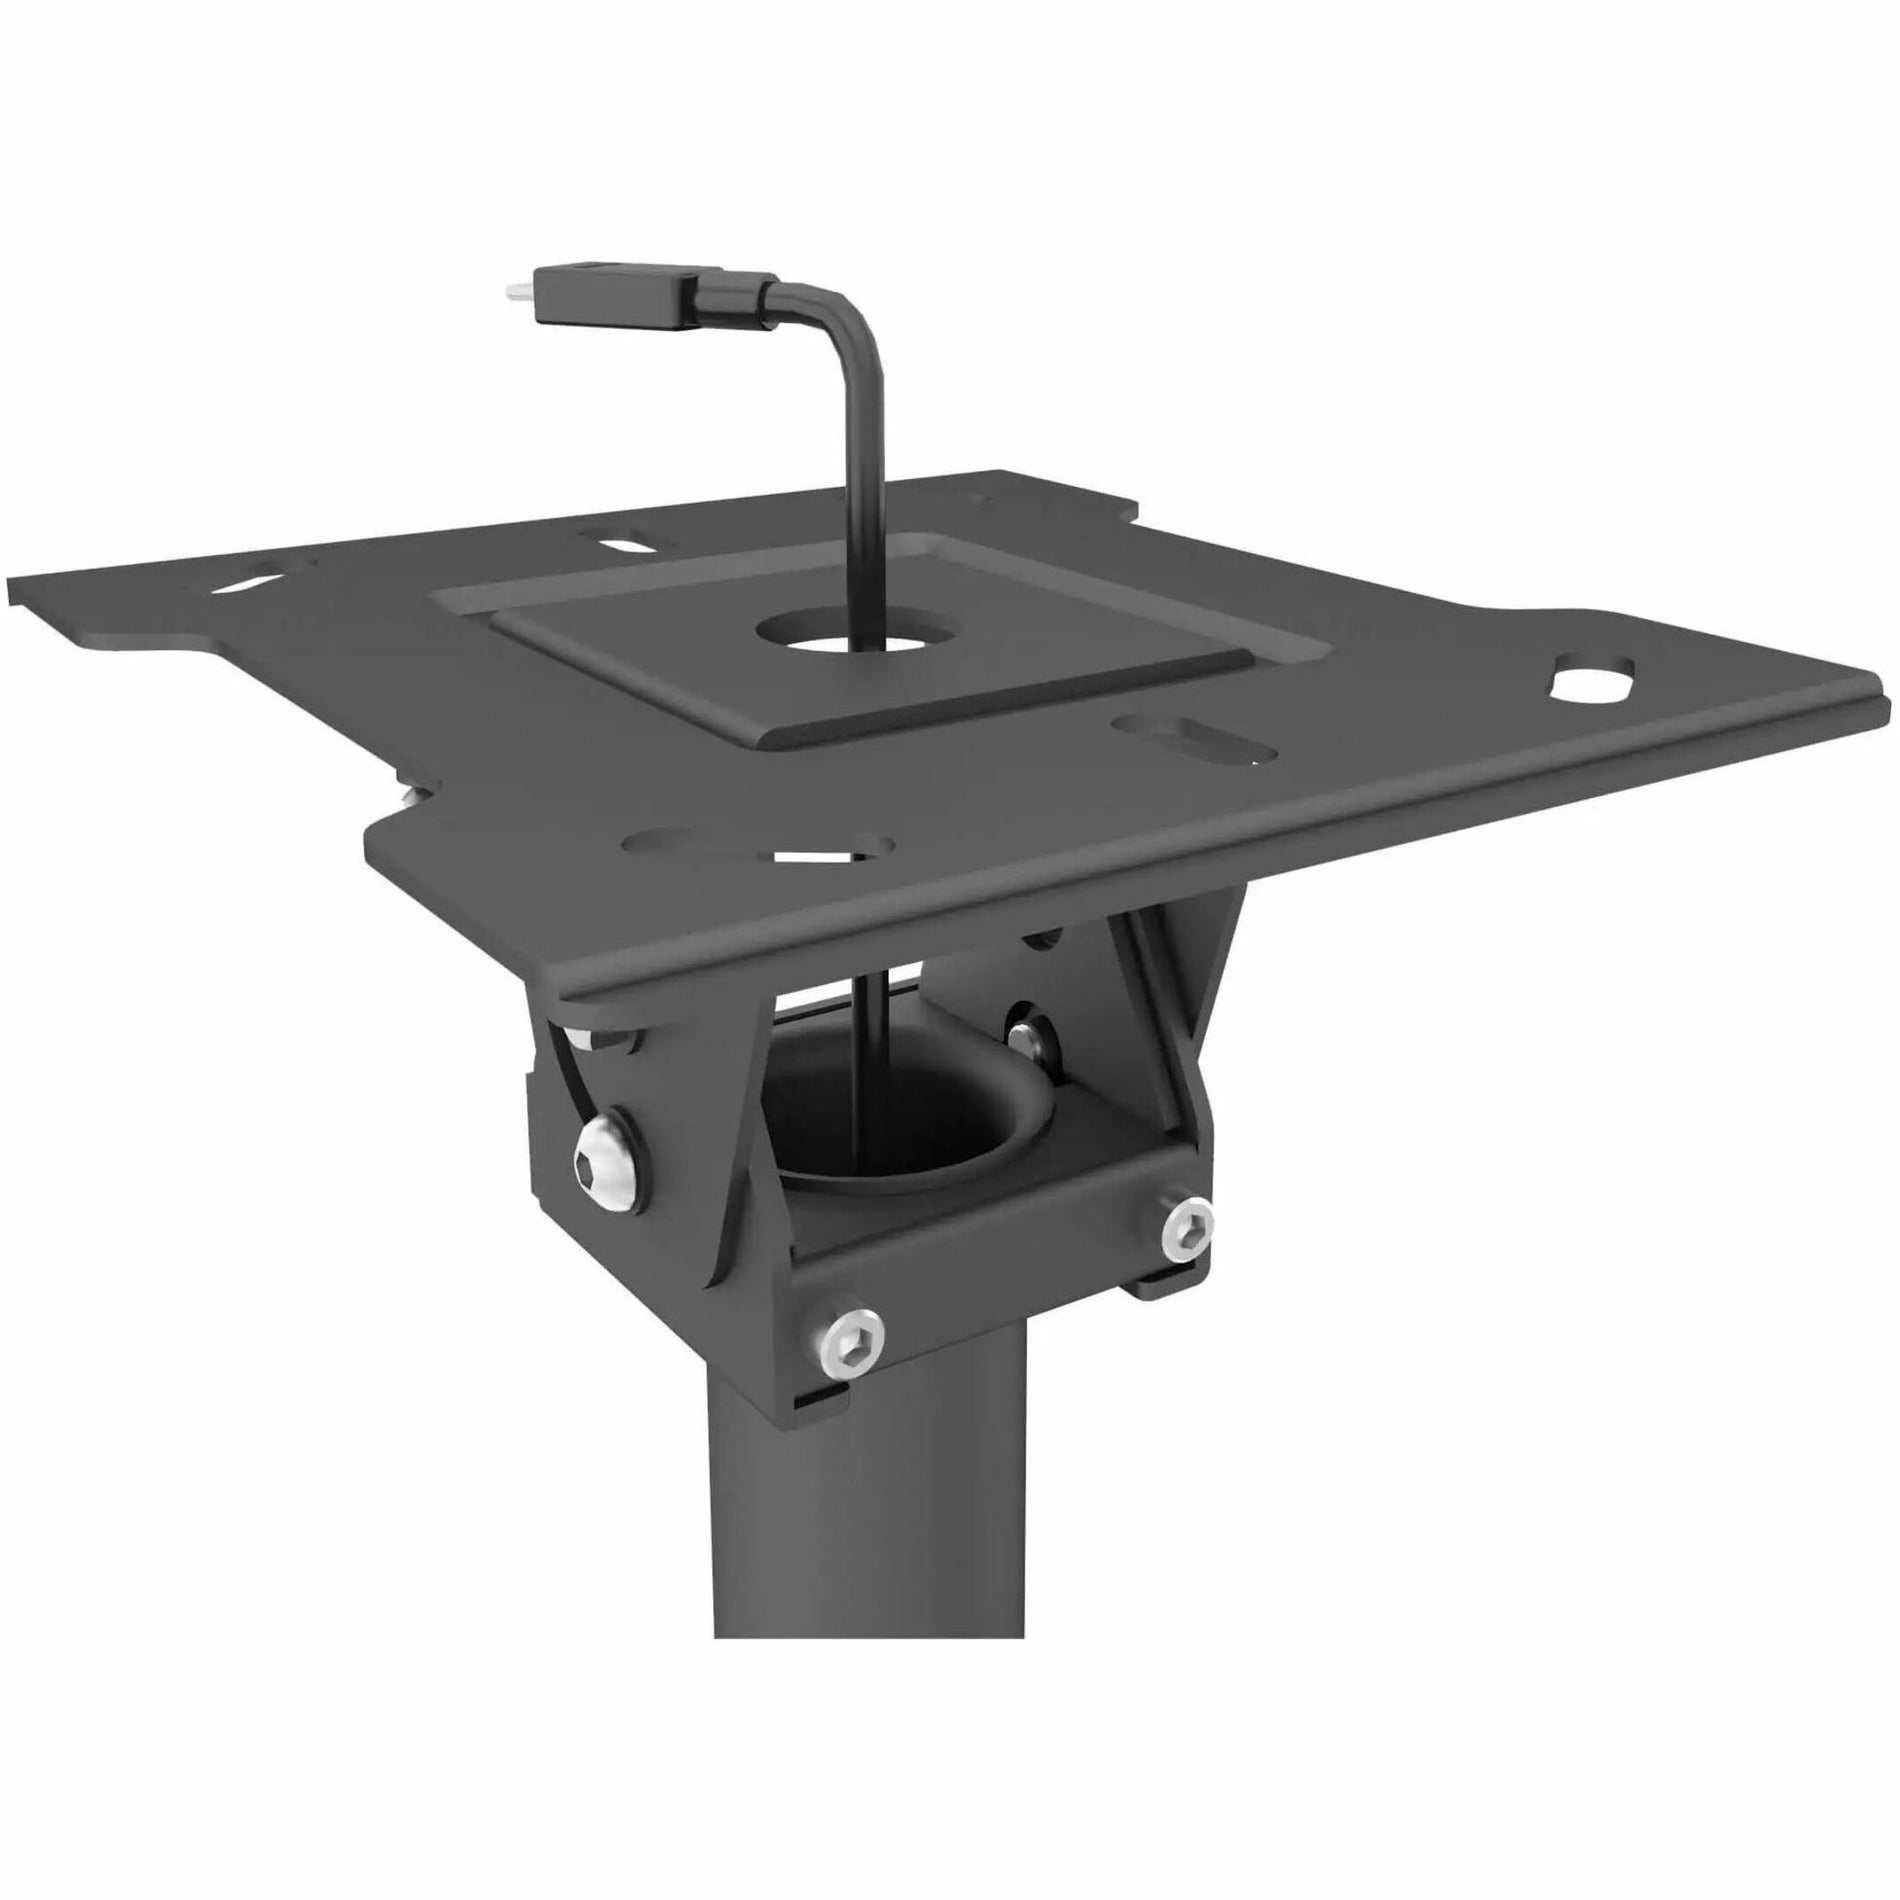 Kanto CM600SG Stainless Steel Outdoor Ceiling TV Mount, 360° Swivel, Rust Resistant, 110 lb Maximum Load Capacity